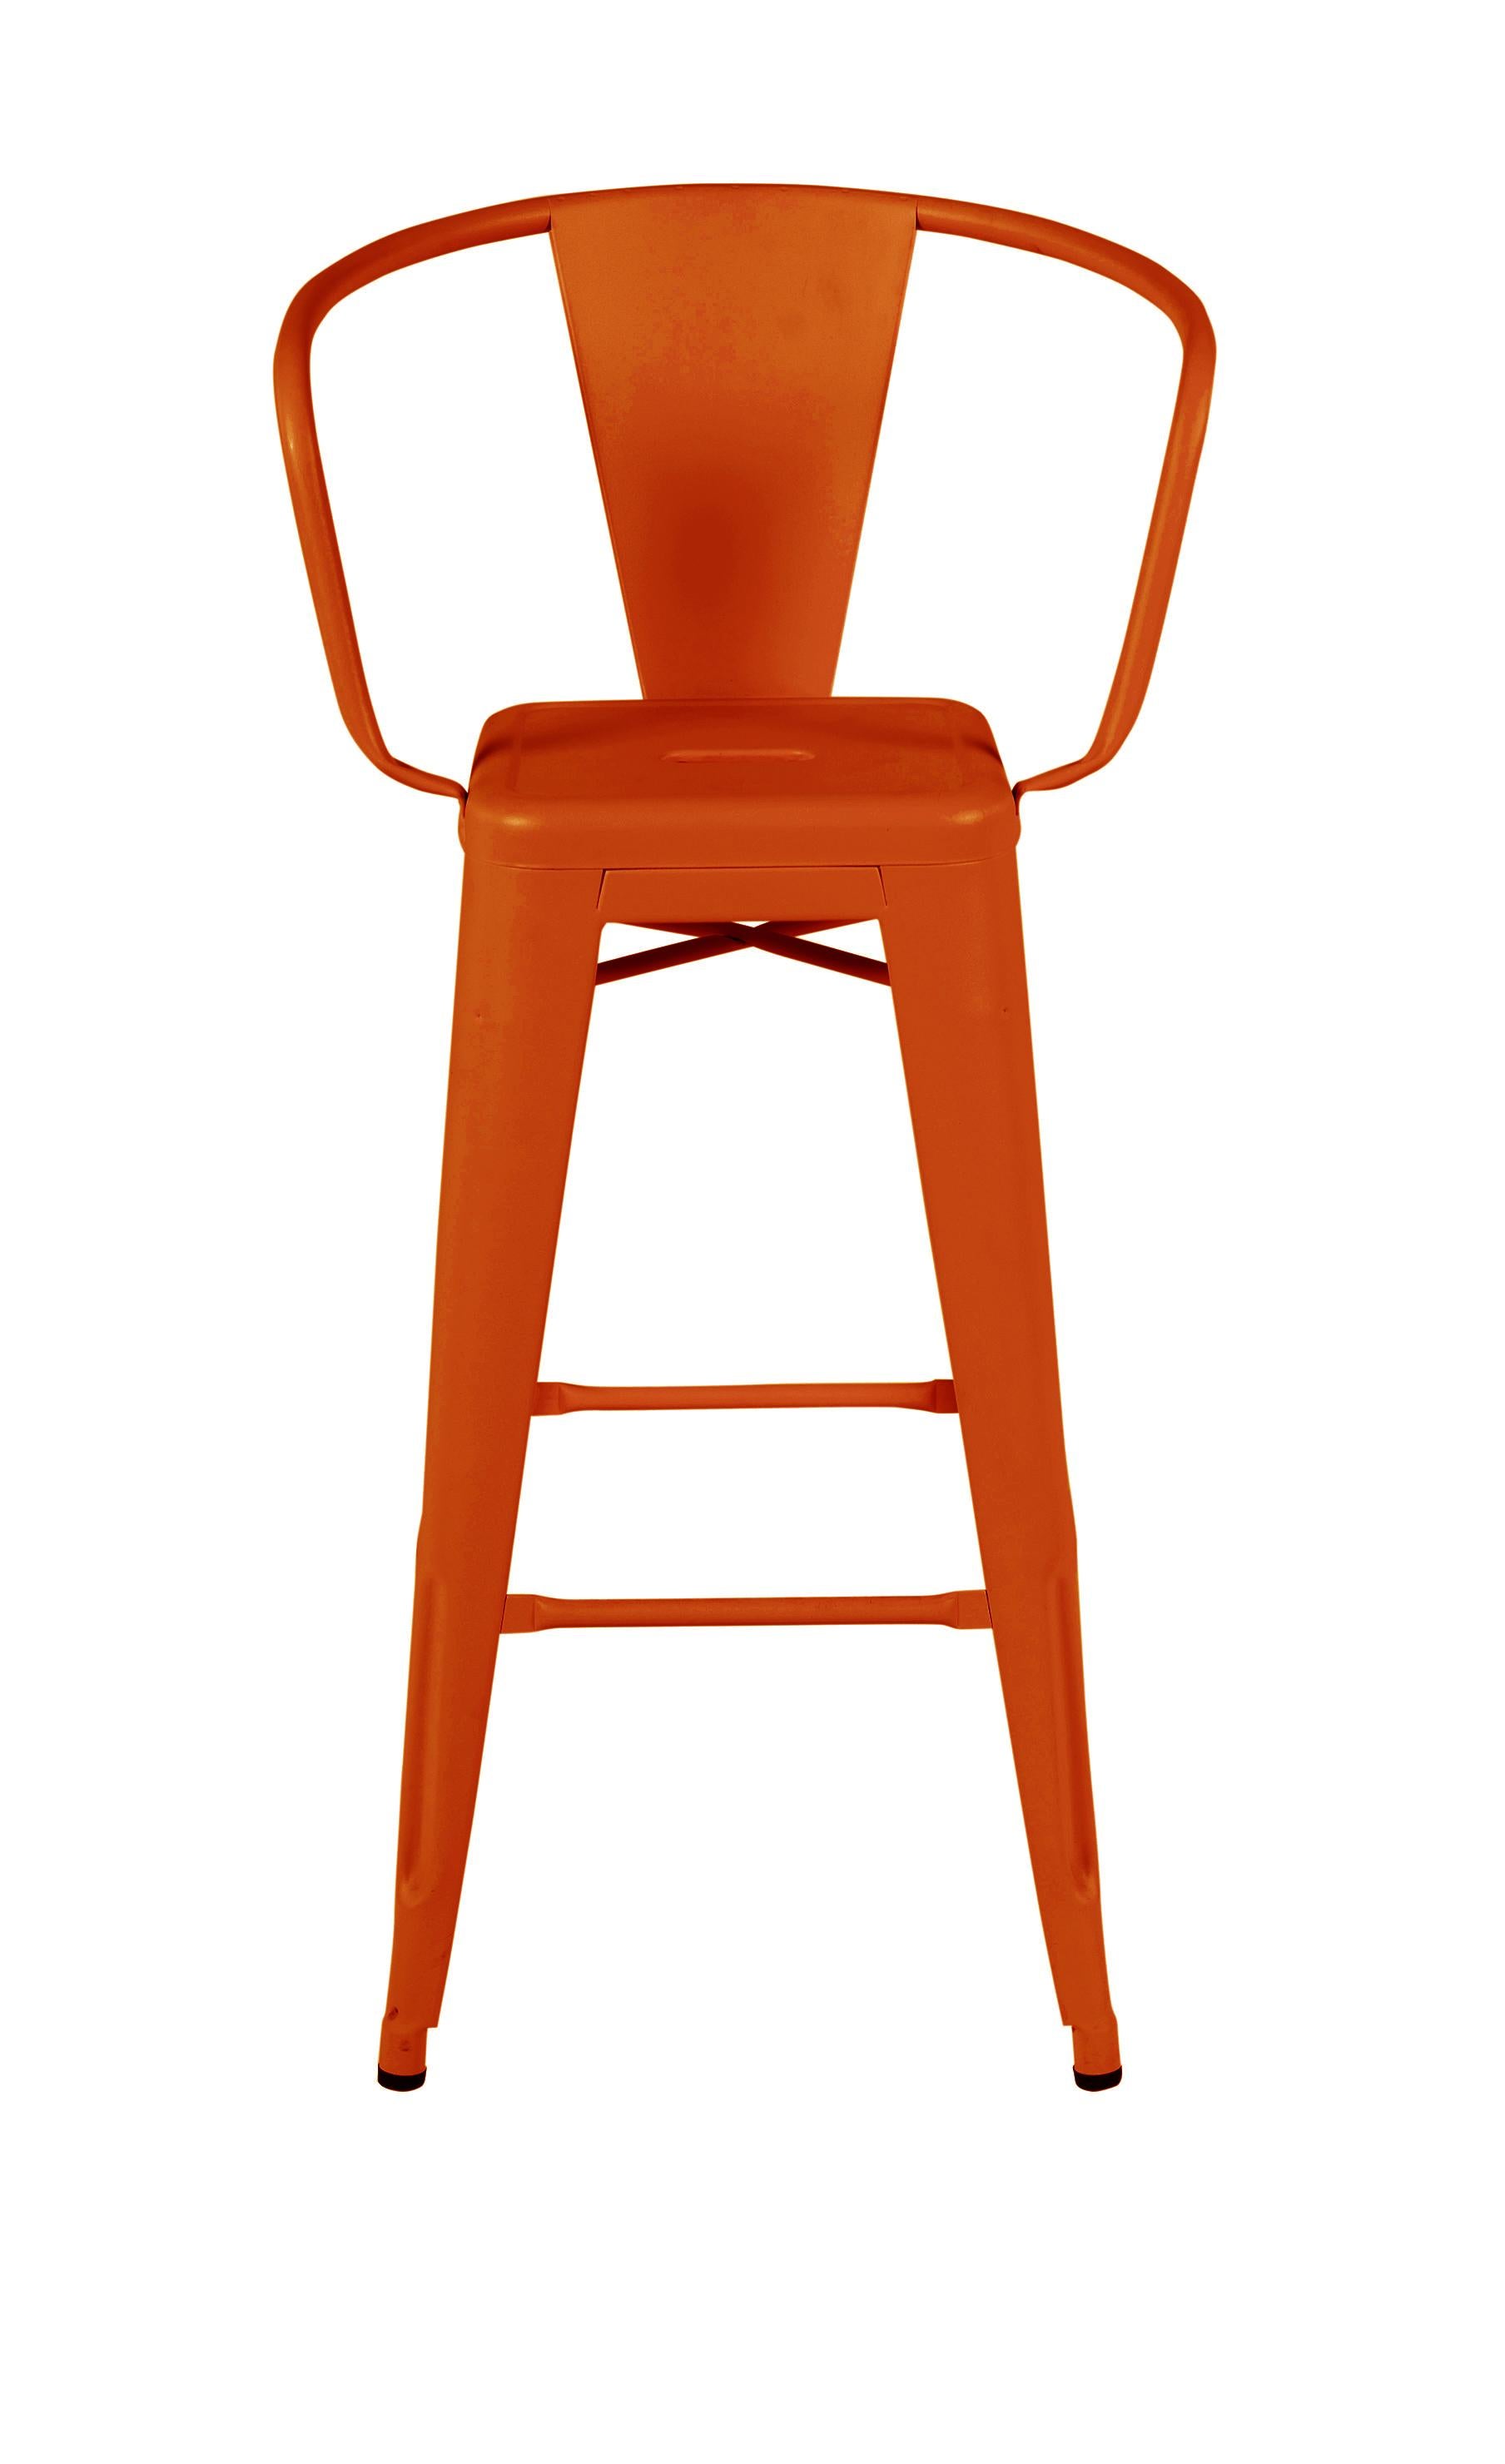 For Sale: Red (Poivron) HA75 Steel Stool in Essential Colors by Tolix